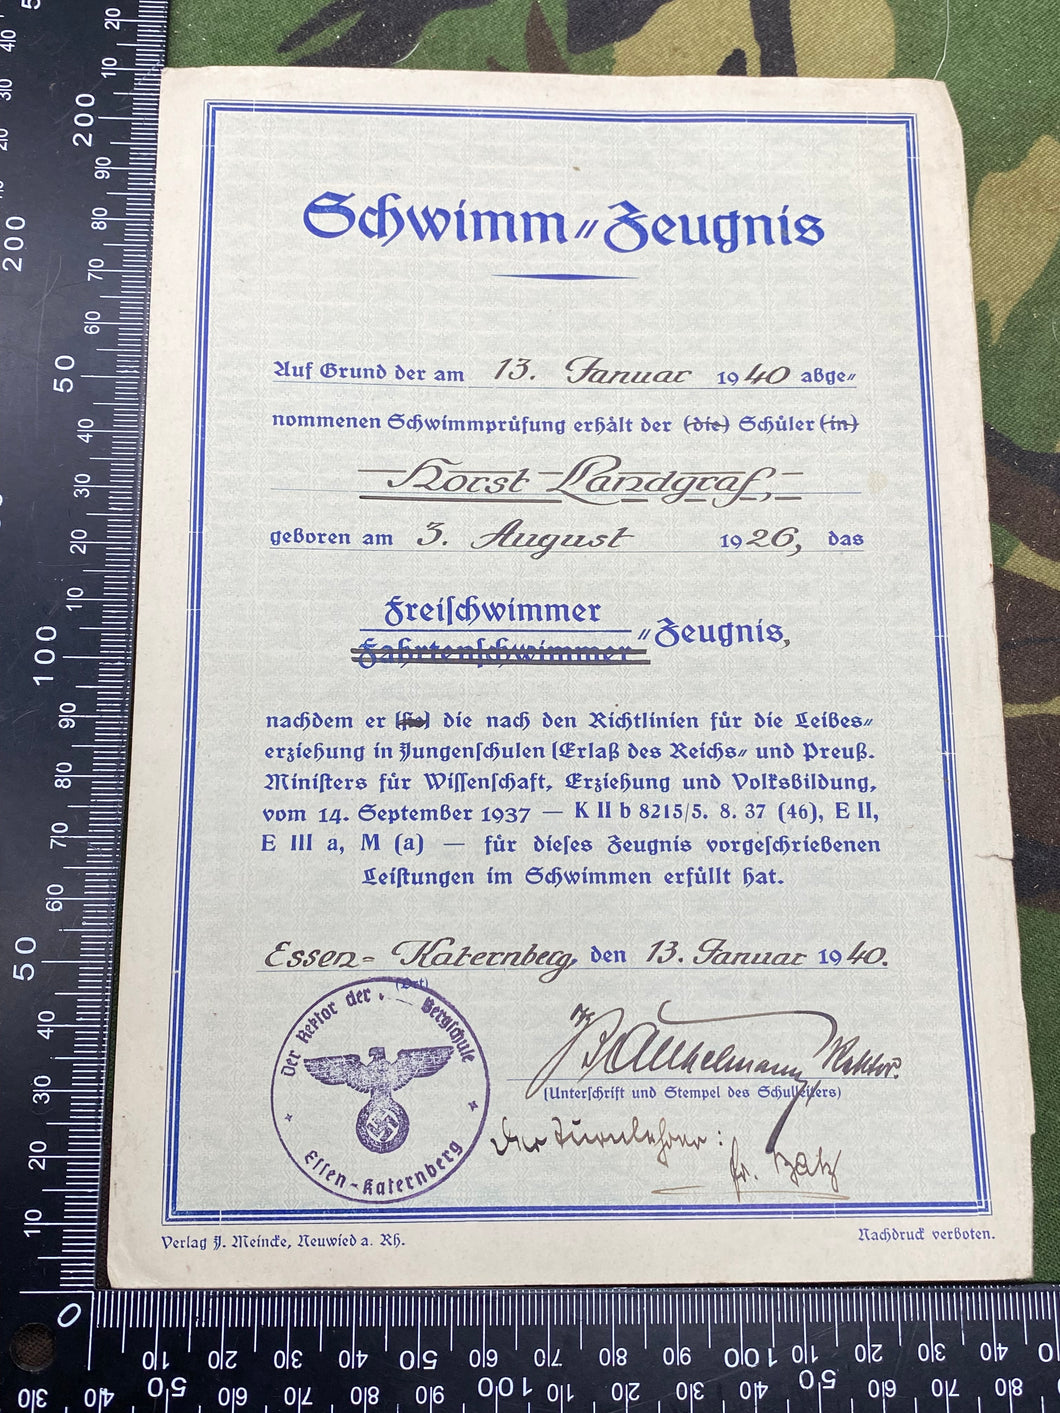 WW2 German Army Signed Swimming Paperwork with signature and good stamp - 1940.